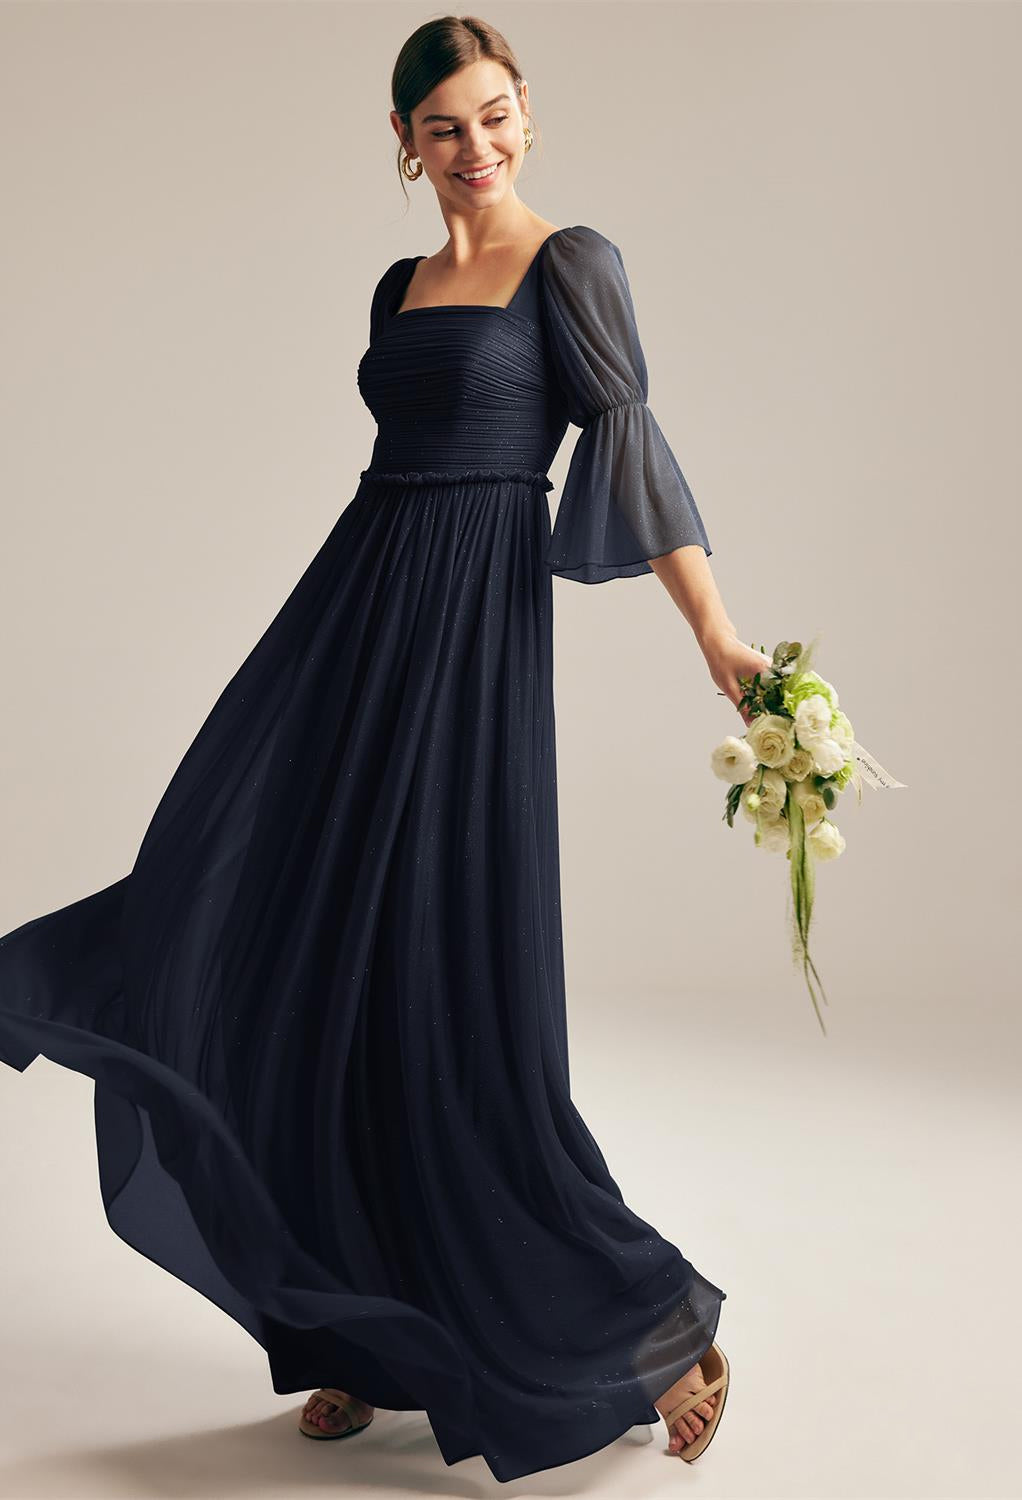 A bride in a navy blue Liza - Glitter Mesh Bridesmaid Dress - Off The Rack visited a bridal shop in London. The dress was from Bergamot Bridal.